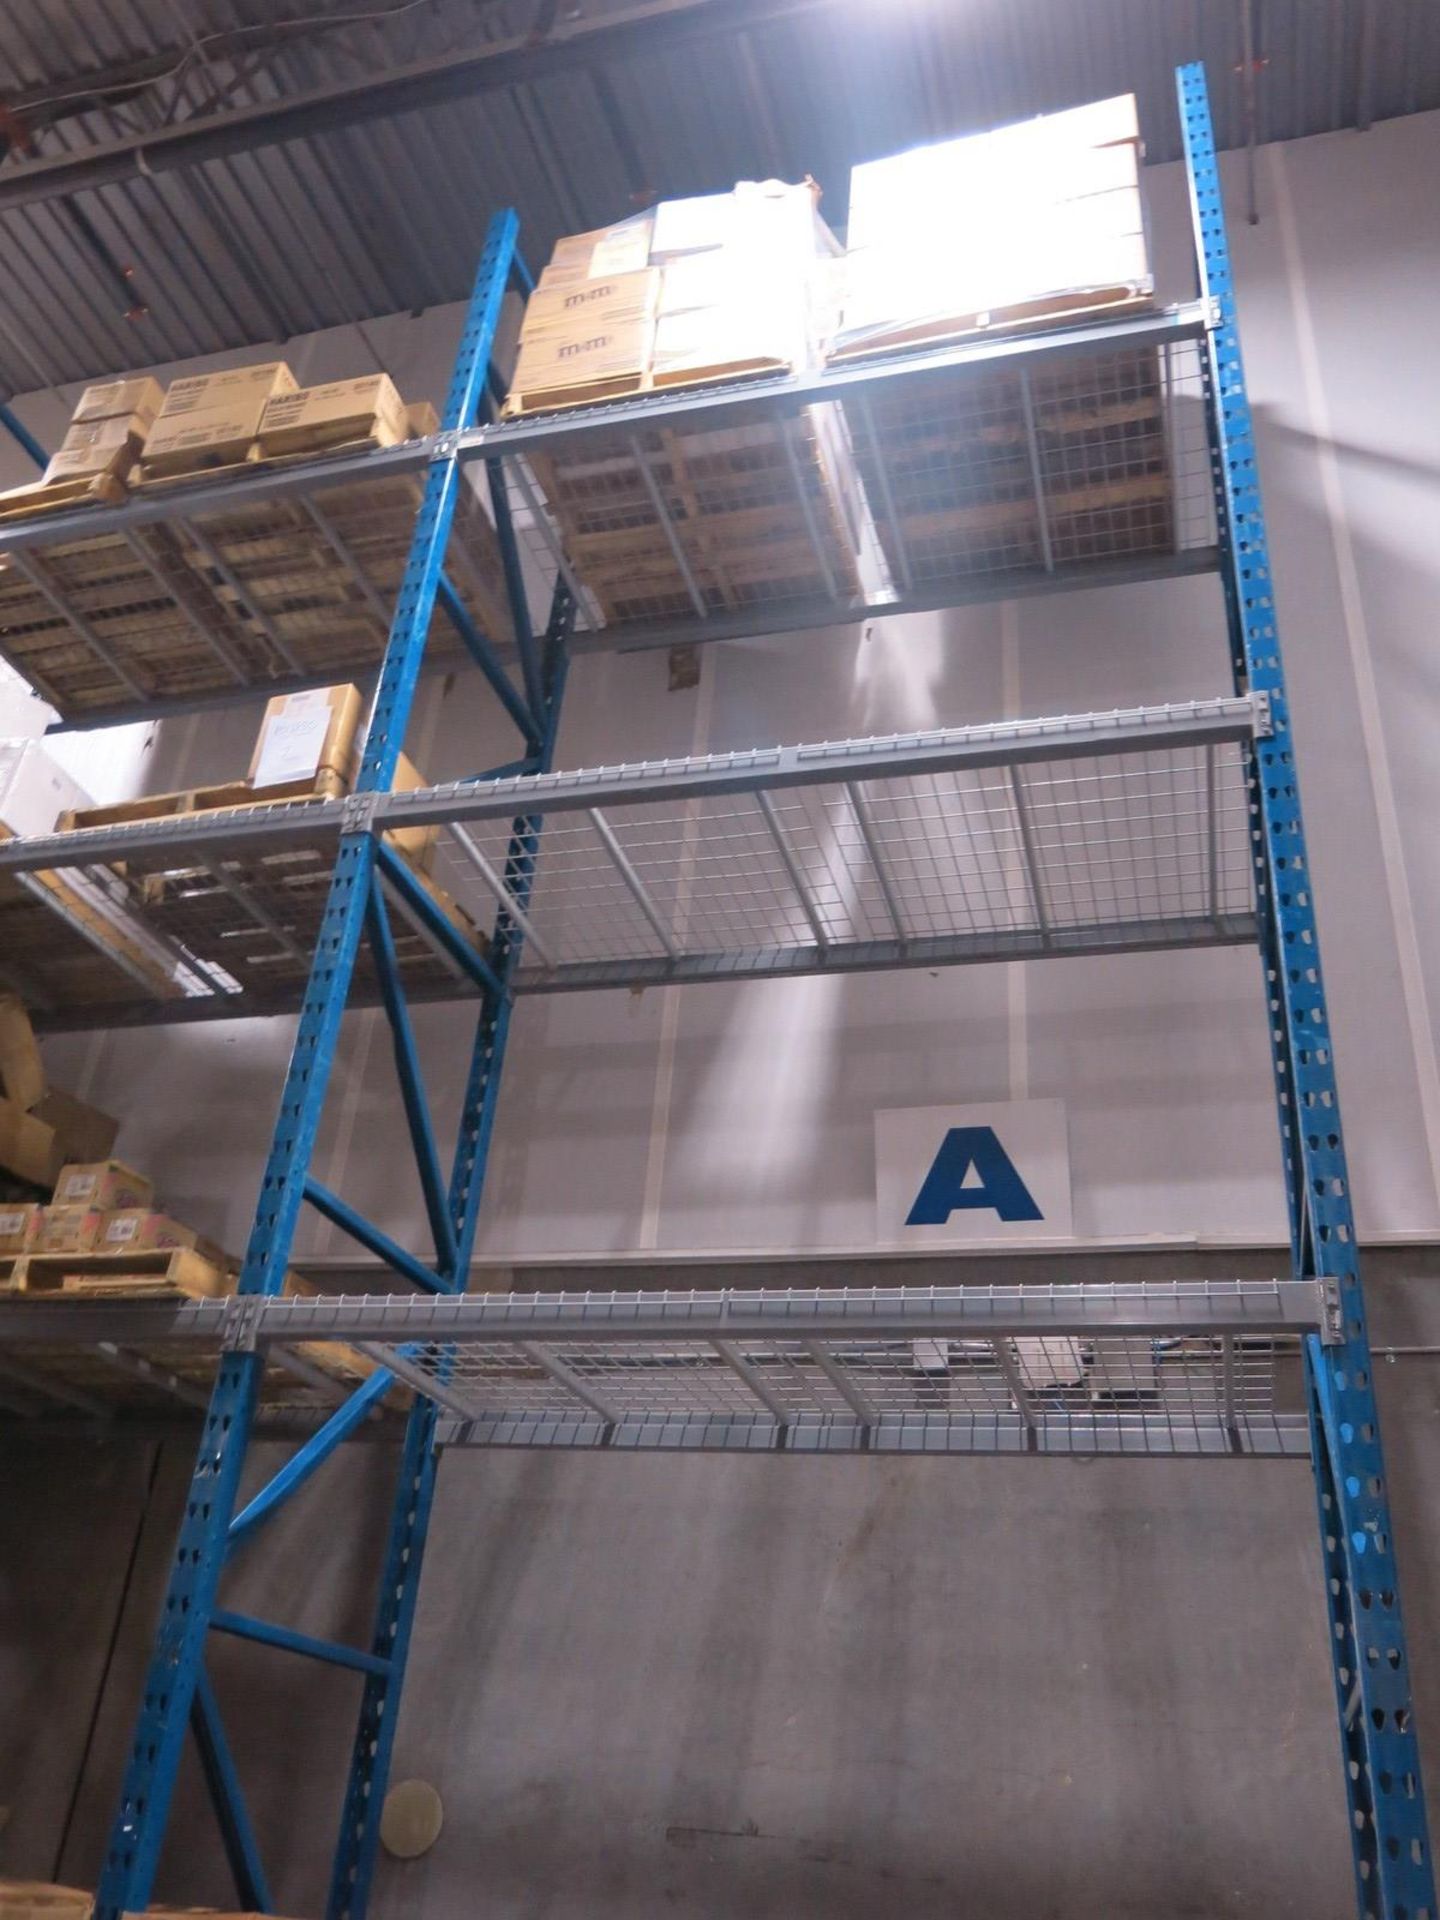 (21) Sections of Tear Drop Style Pallet Racking, with (24) Appr - Sub to Bulk | Rig Fee: See Desc - Image 2 of 2